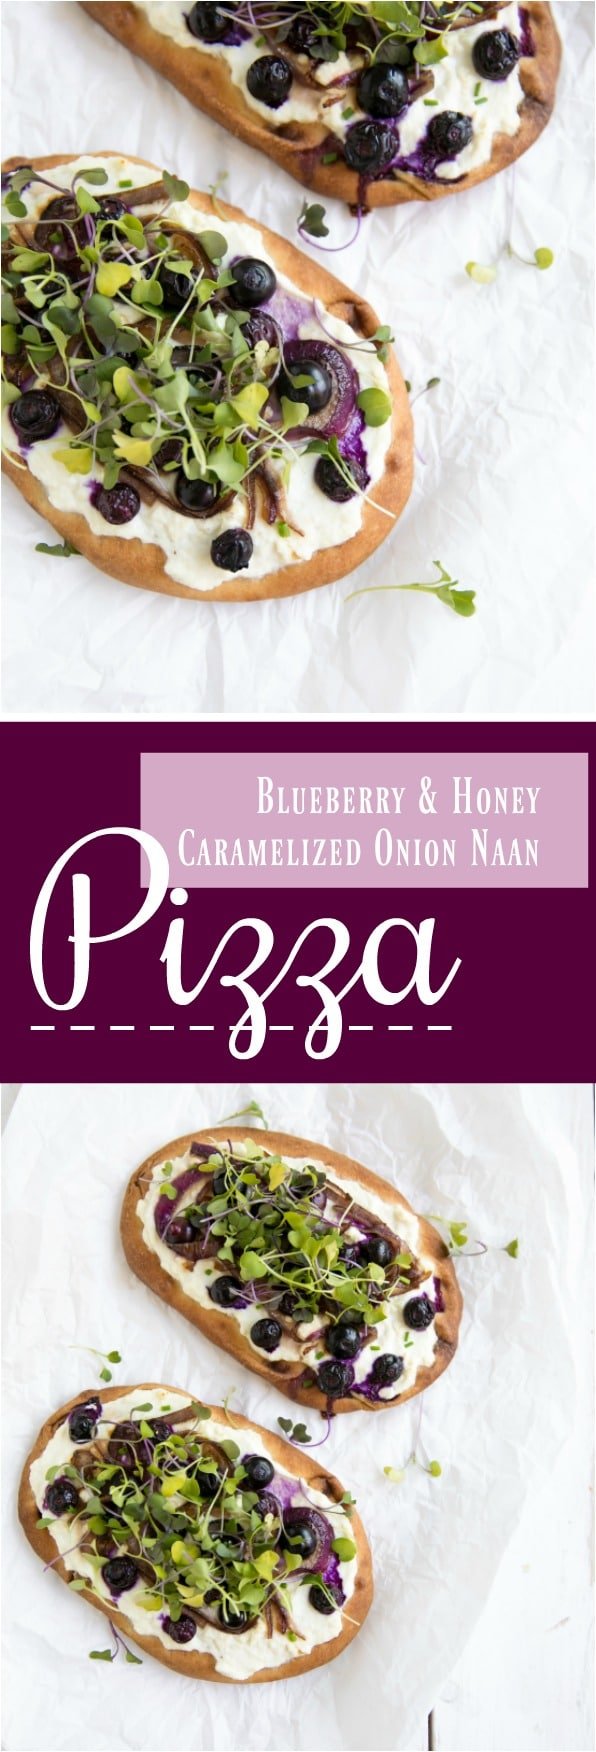 naan used as crust of pizza with blue berries, sprouts, caramelized onion, honey